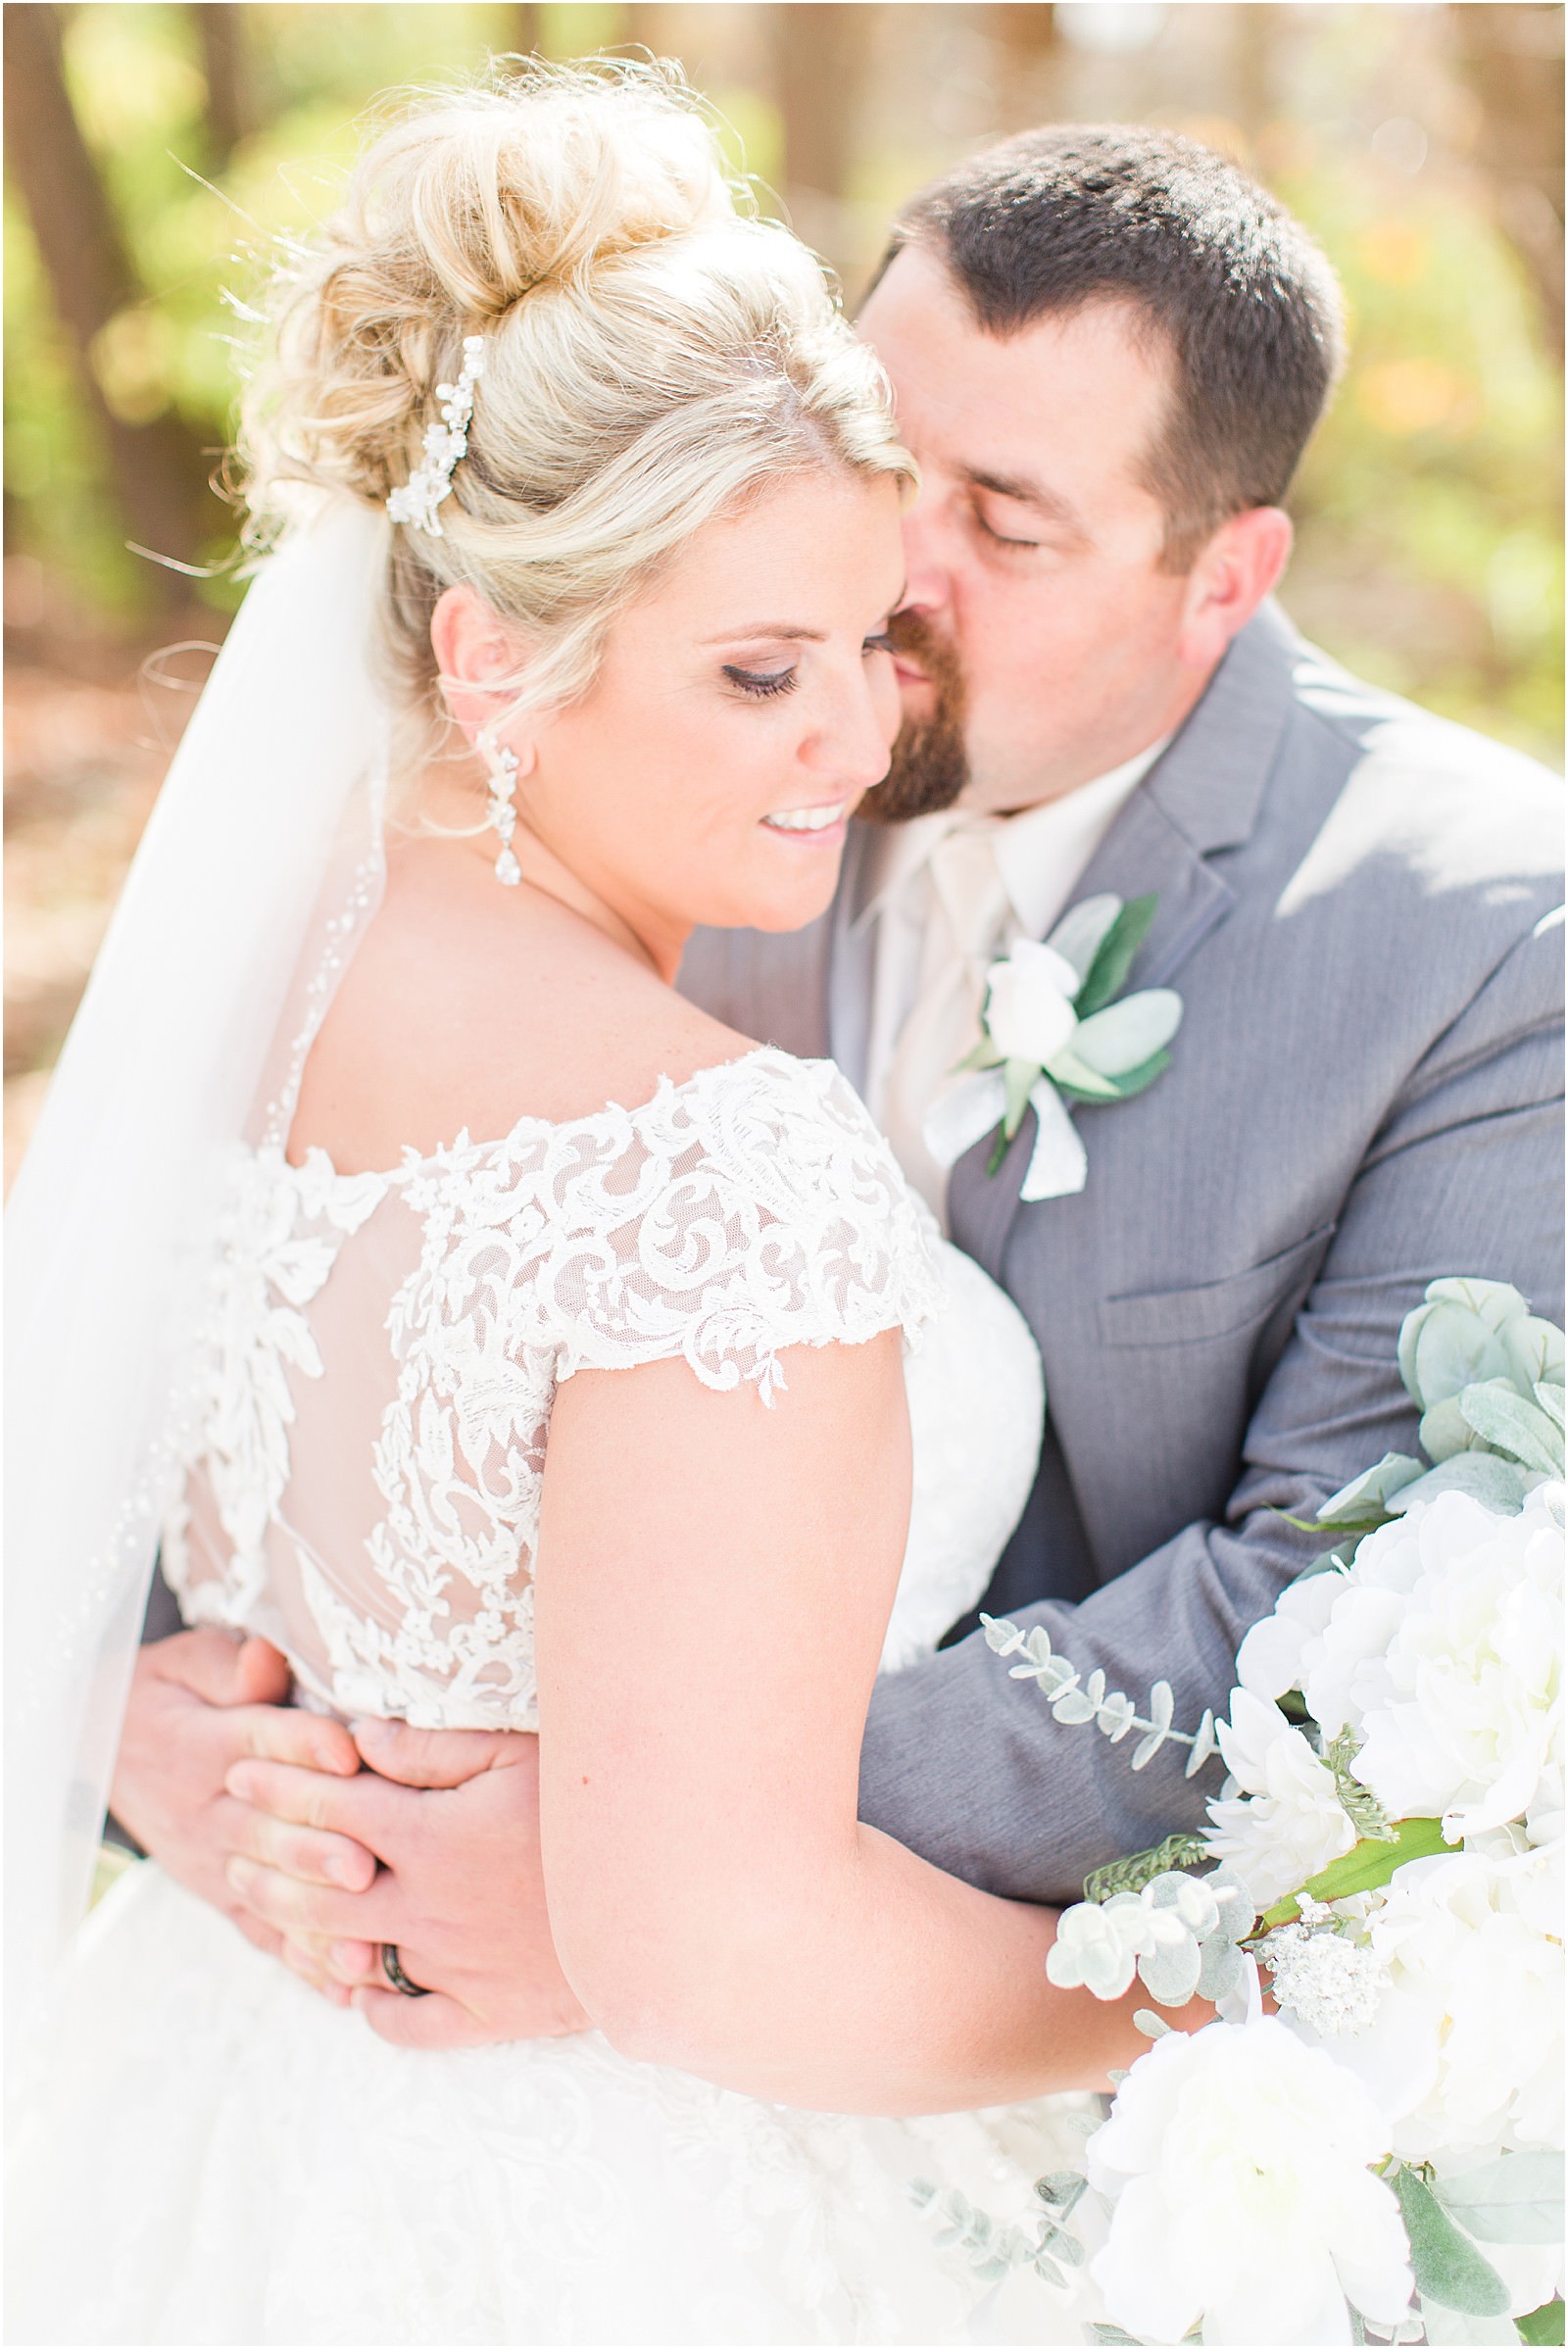 A Navy and Blush Wedding in Tell City Indiana | Brianna and Matt | Bret and Brandie Photography 0101.jpg